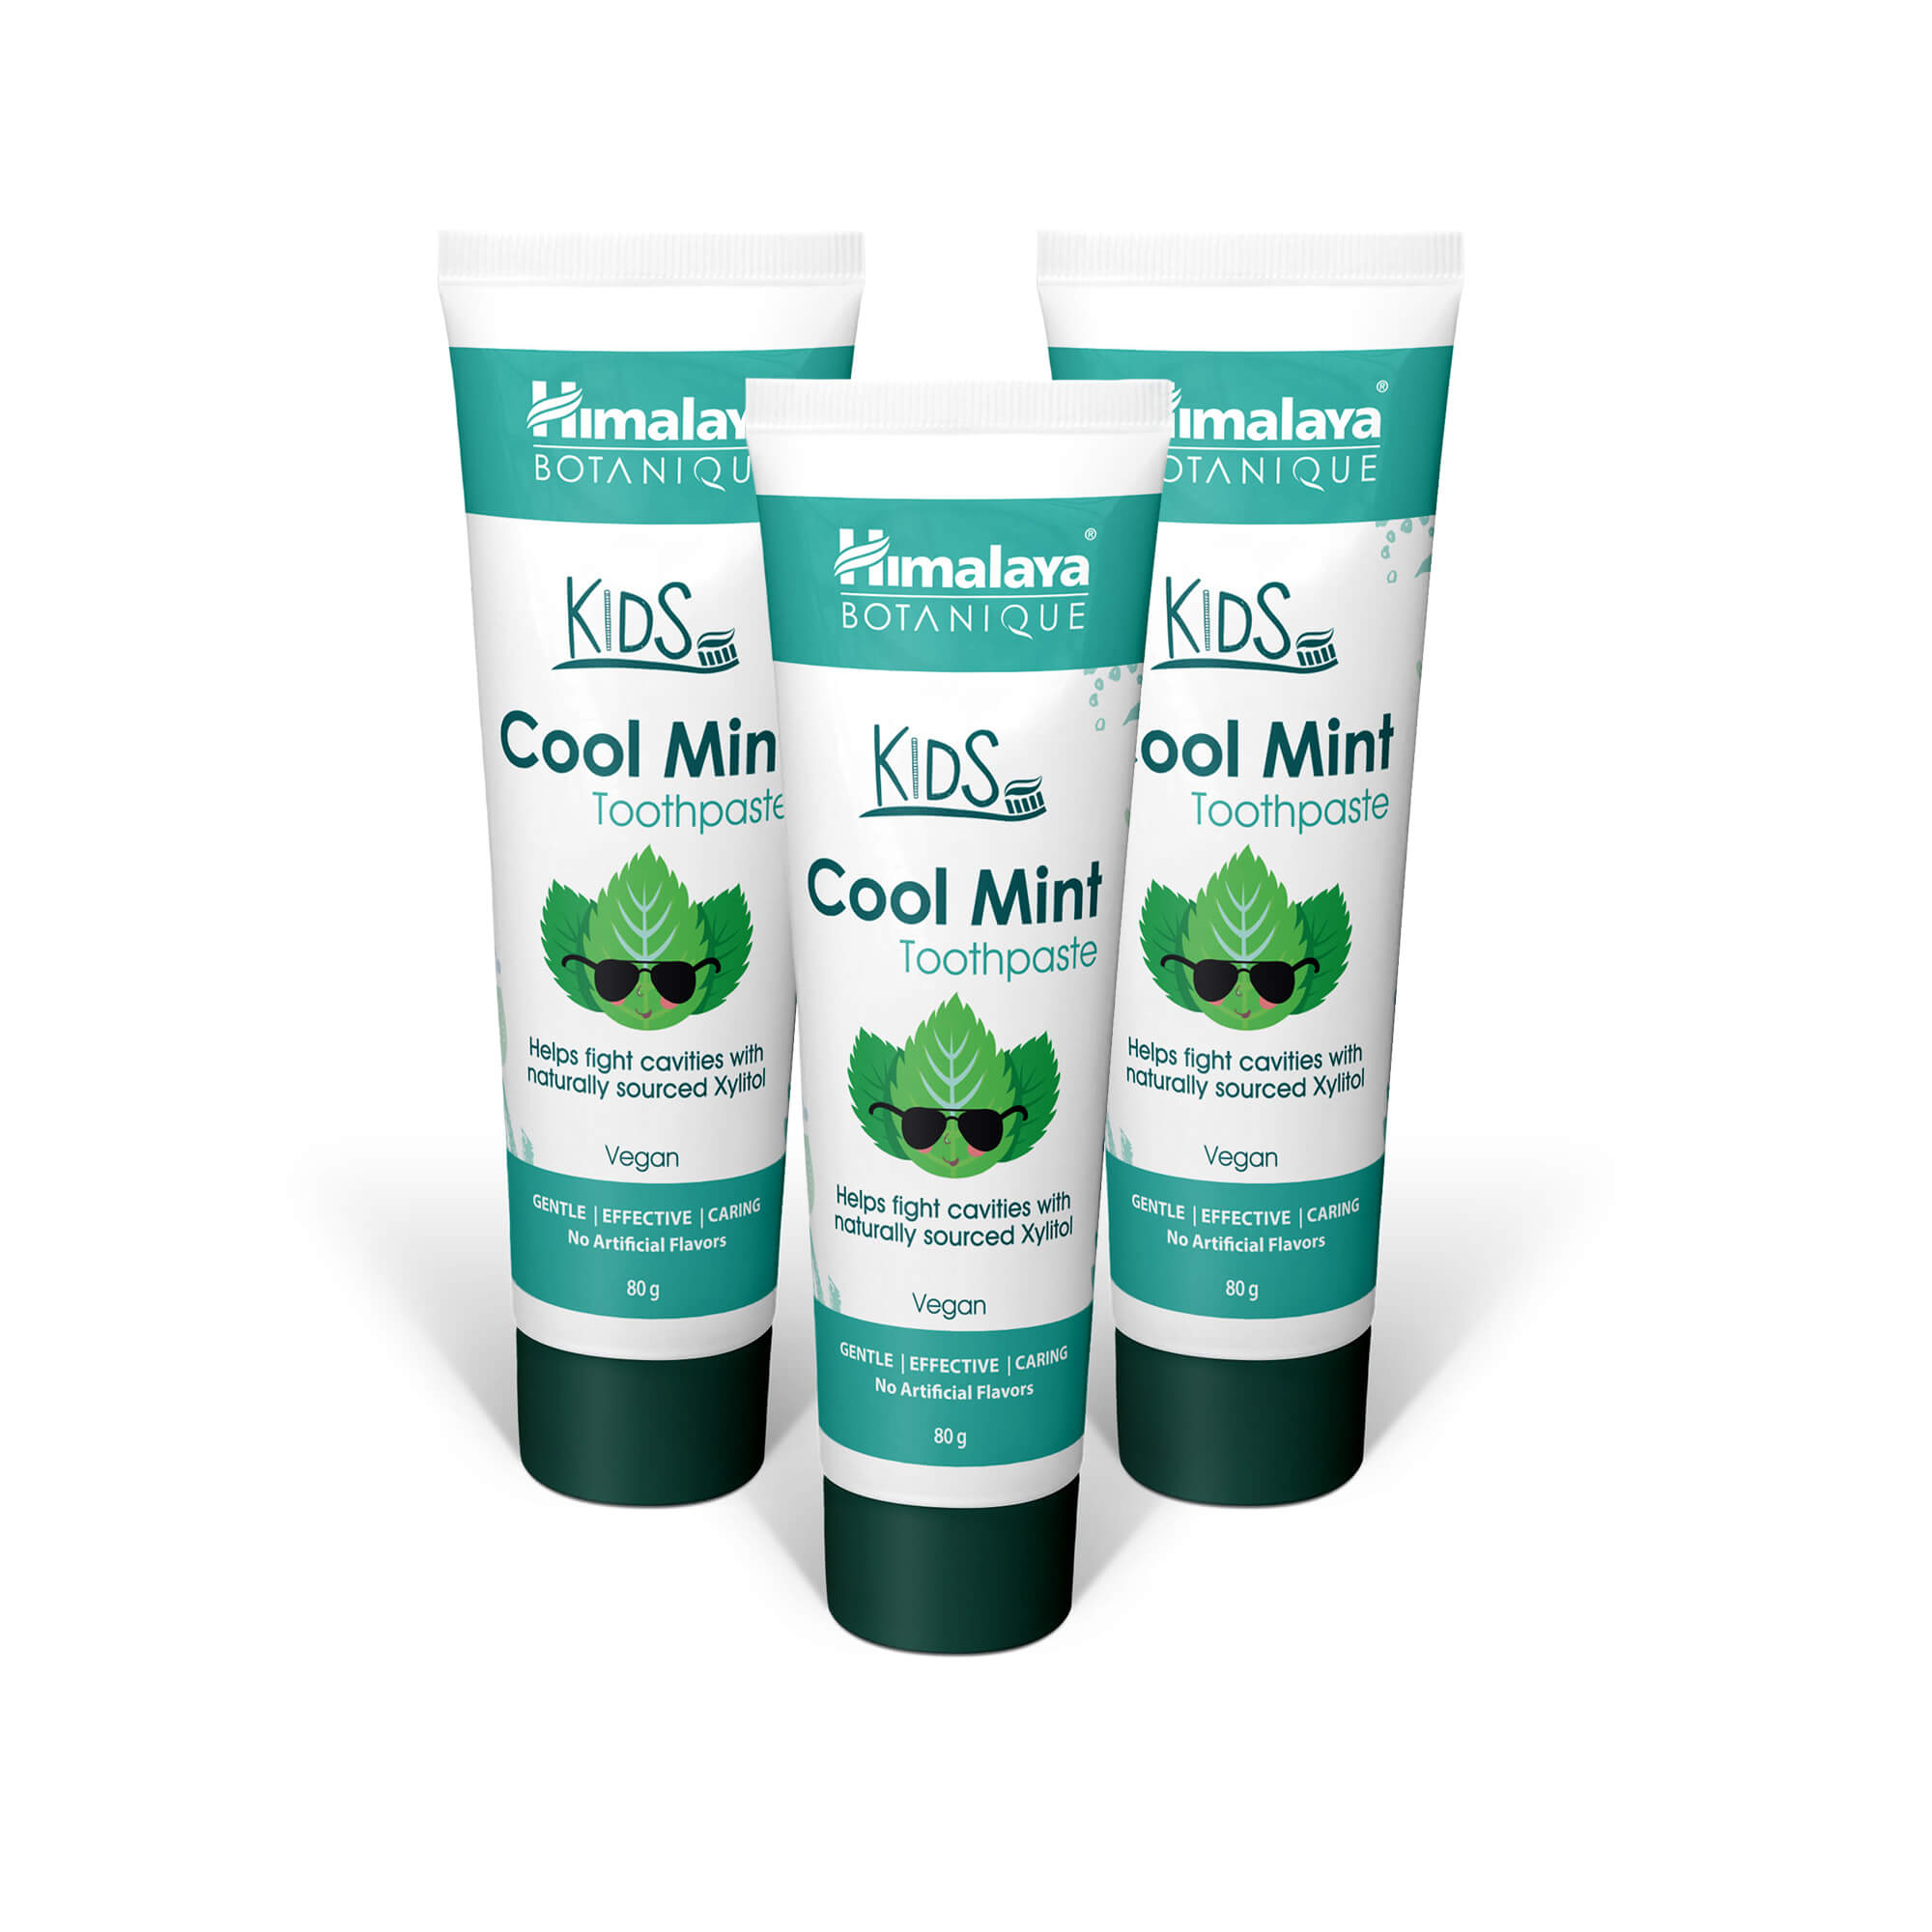 Himalaya Kids Cool Mint Toothpaste - 80g (Pack of 3)